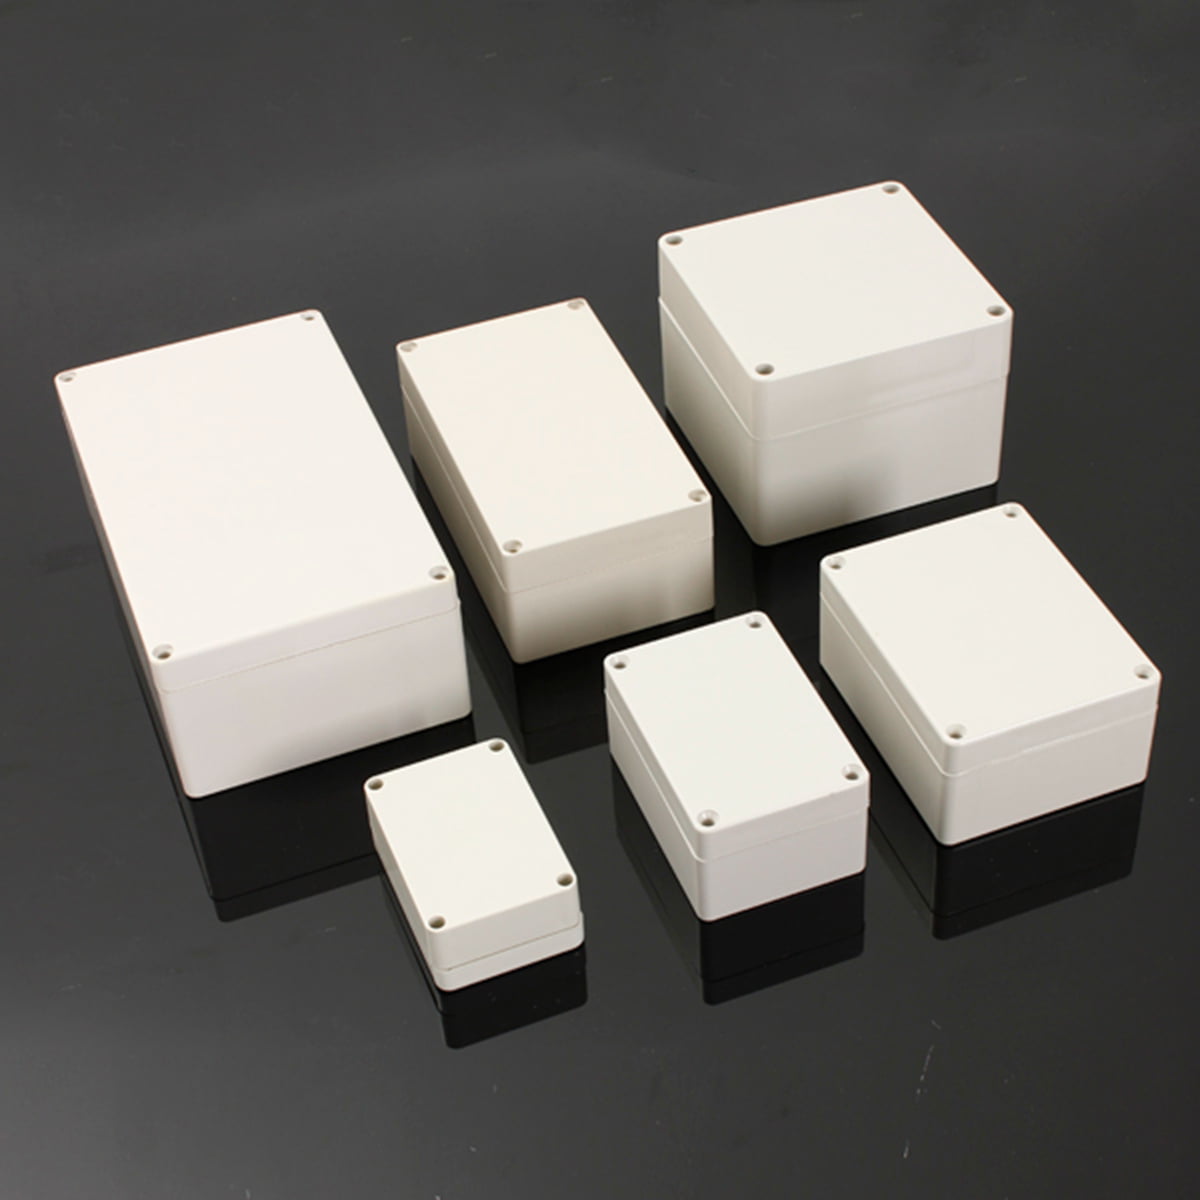 100x68x50mm ABS PLASTIC ELECTRONICS PROJECT BOX ENCLOSURE HOBBY CASE US